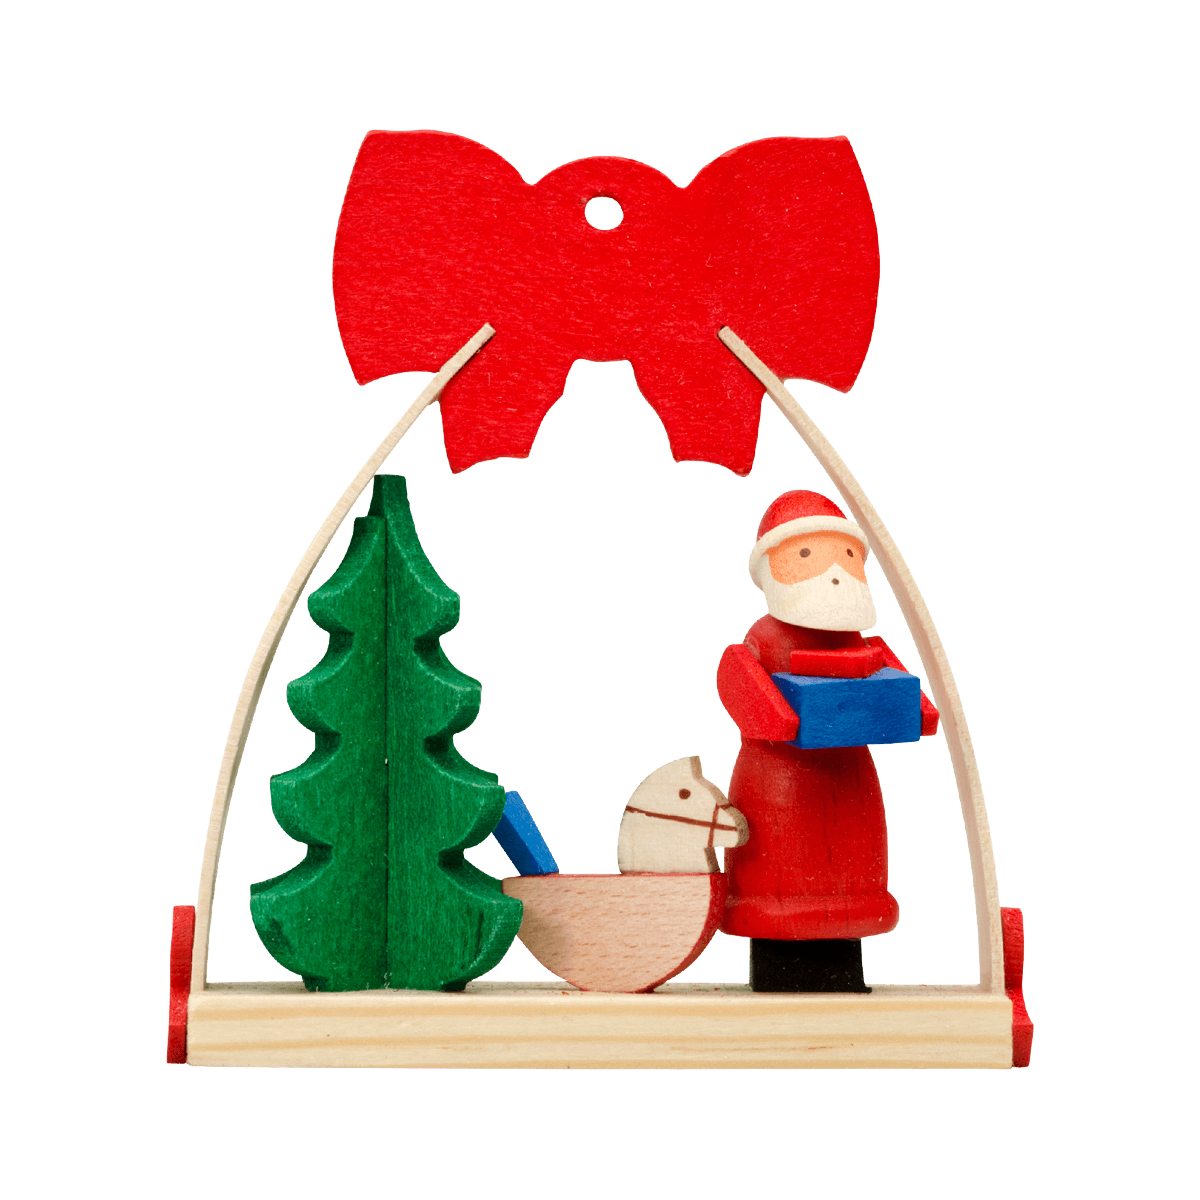 Arch with bow 'Santa Claus' Ornament - with rocking horse -